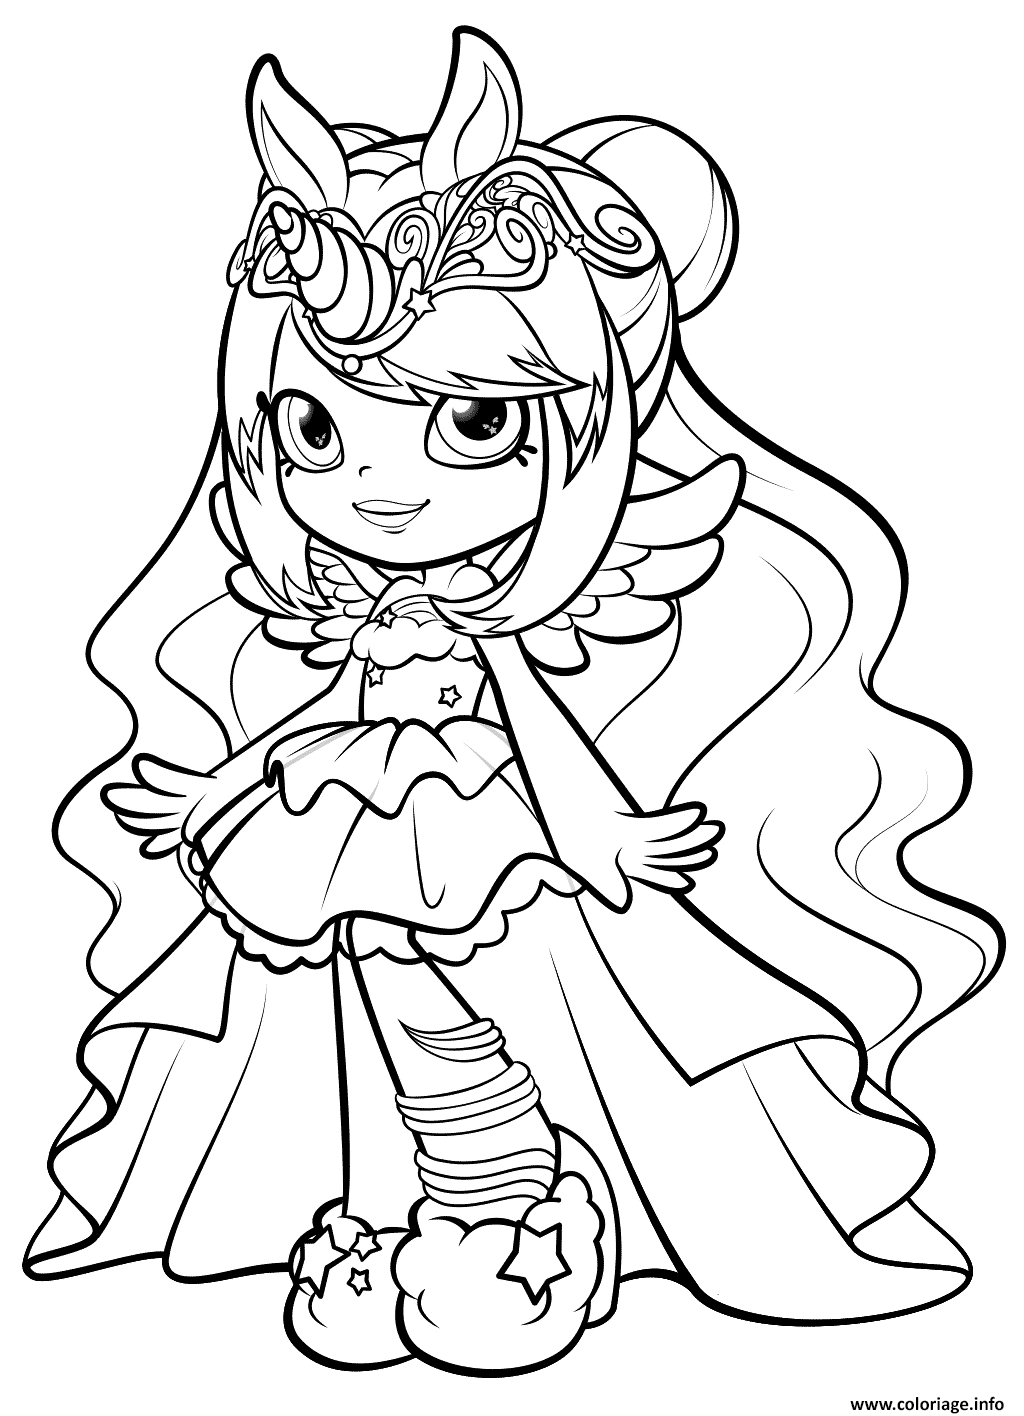 coloriage-shopkins-mysterbella-wild-style-shoppies-doll-jecolorie